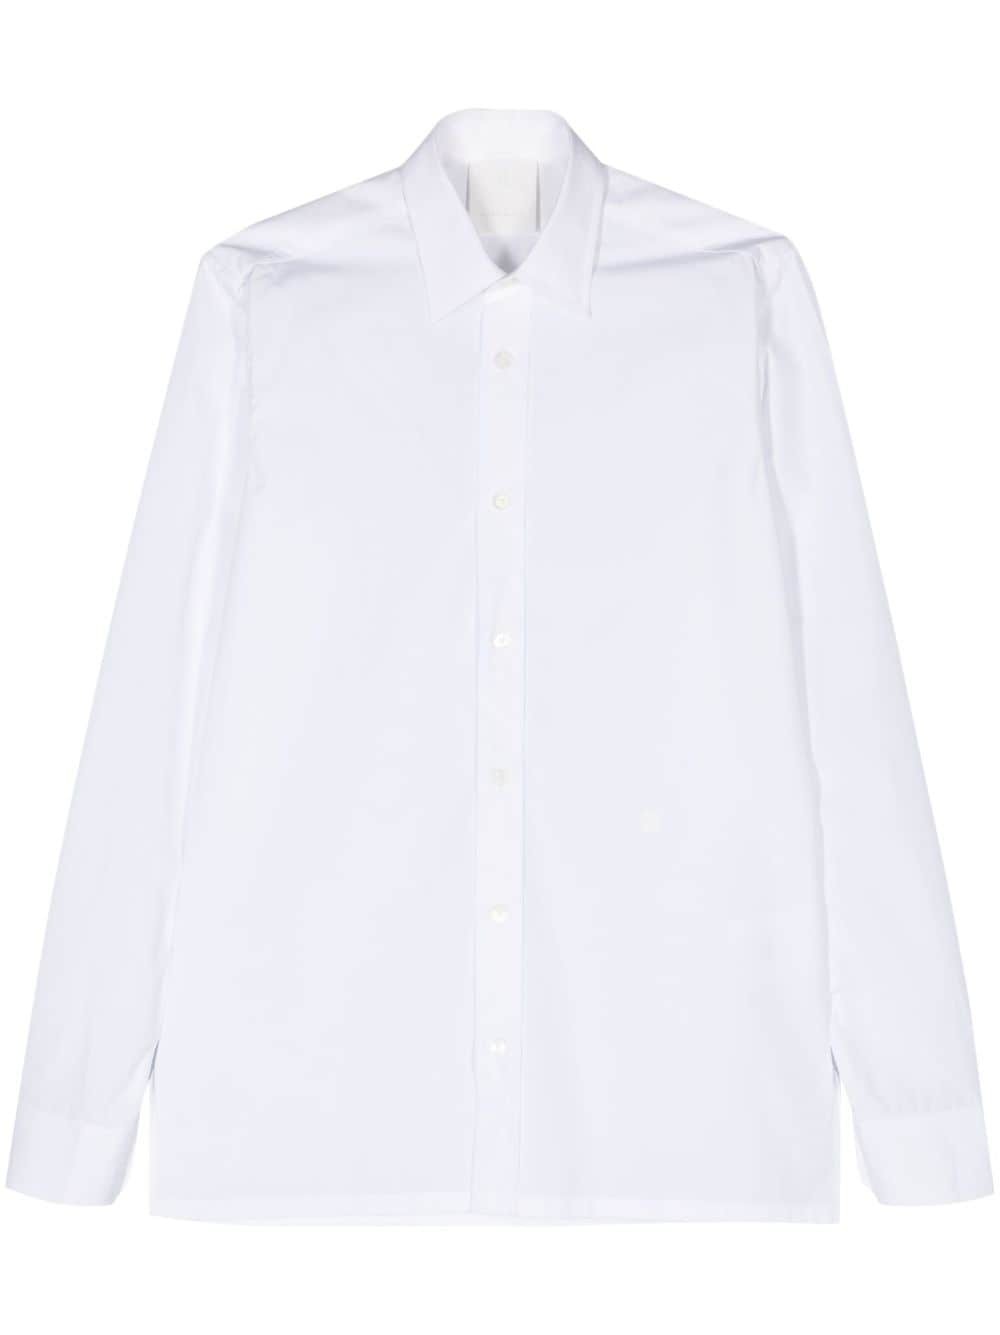 4G embroidered shirt